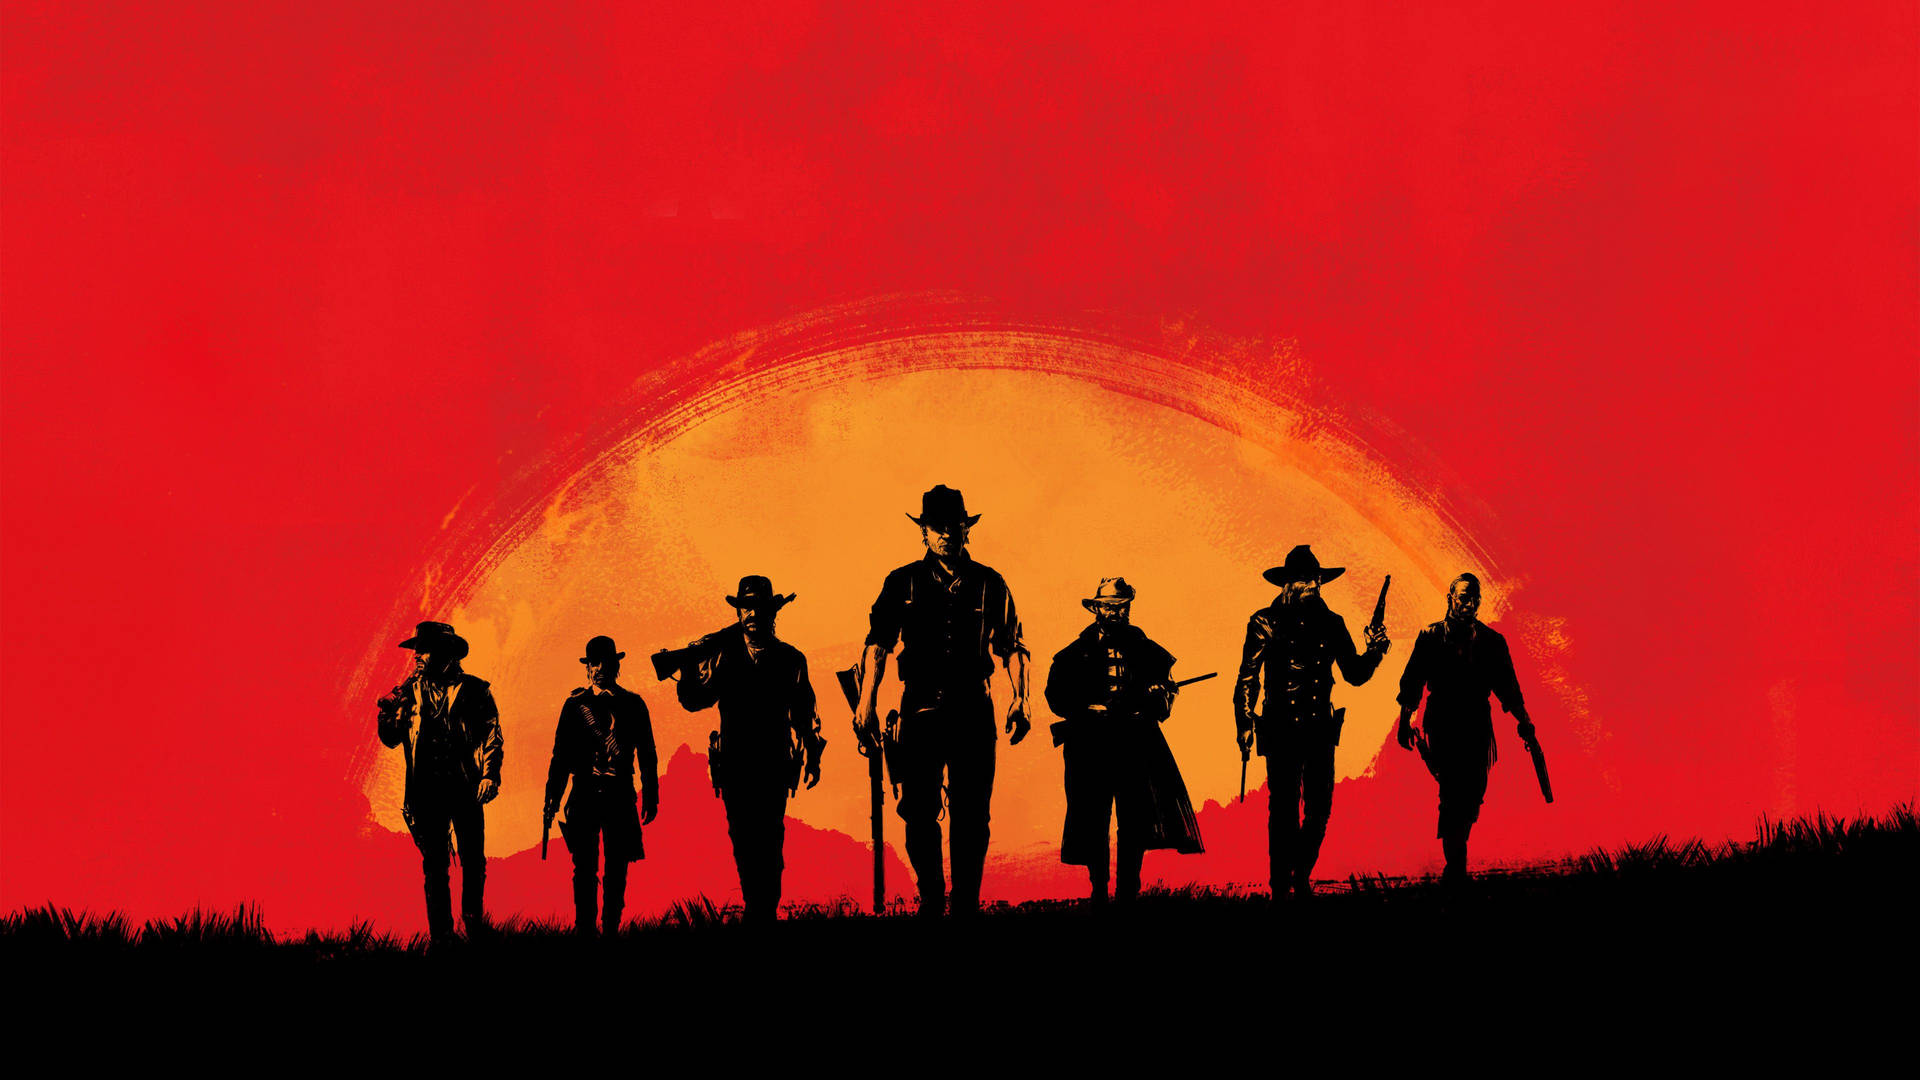 Red Dead Redemption Characters 4k Ps4 Wallpaper